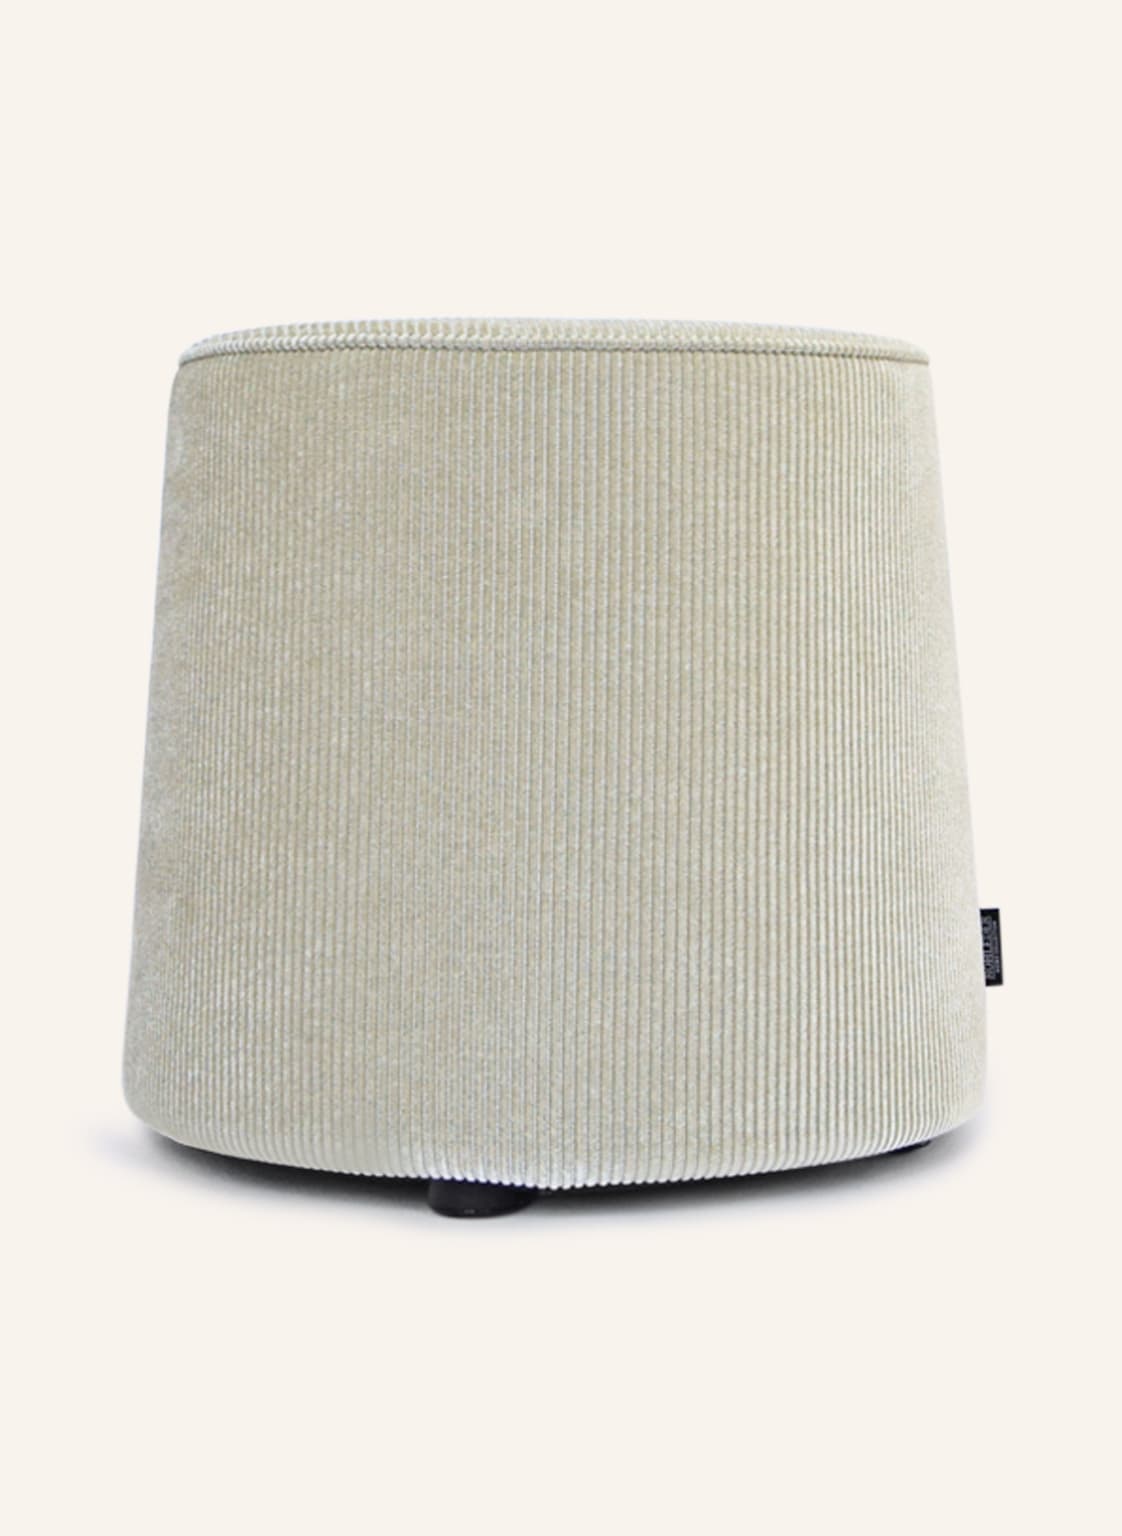 Image of Rohleder Cord-Pouf weiss